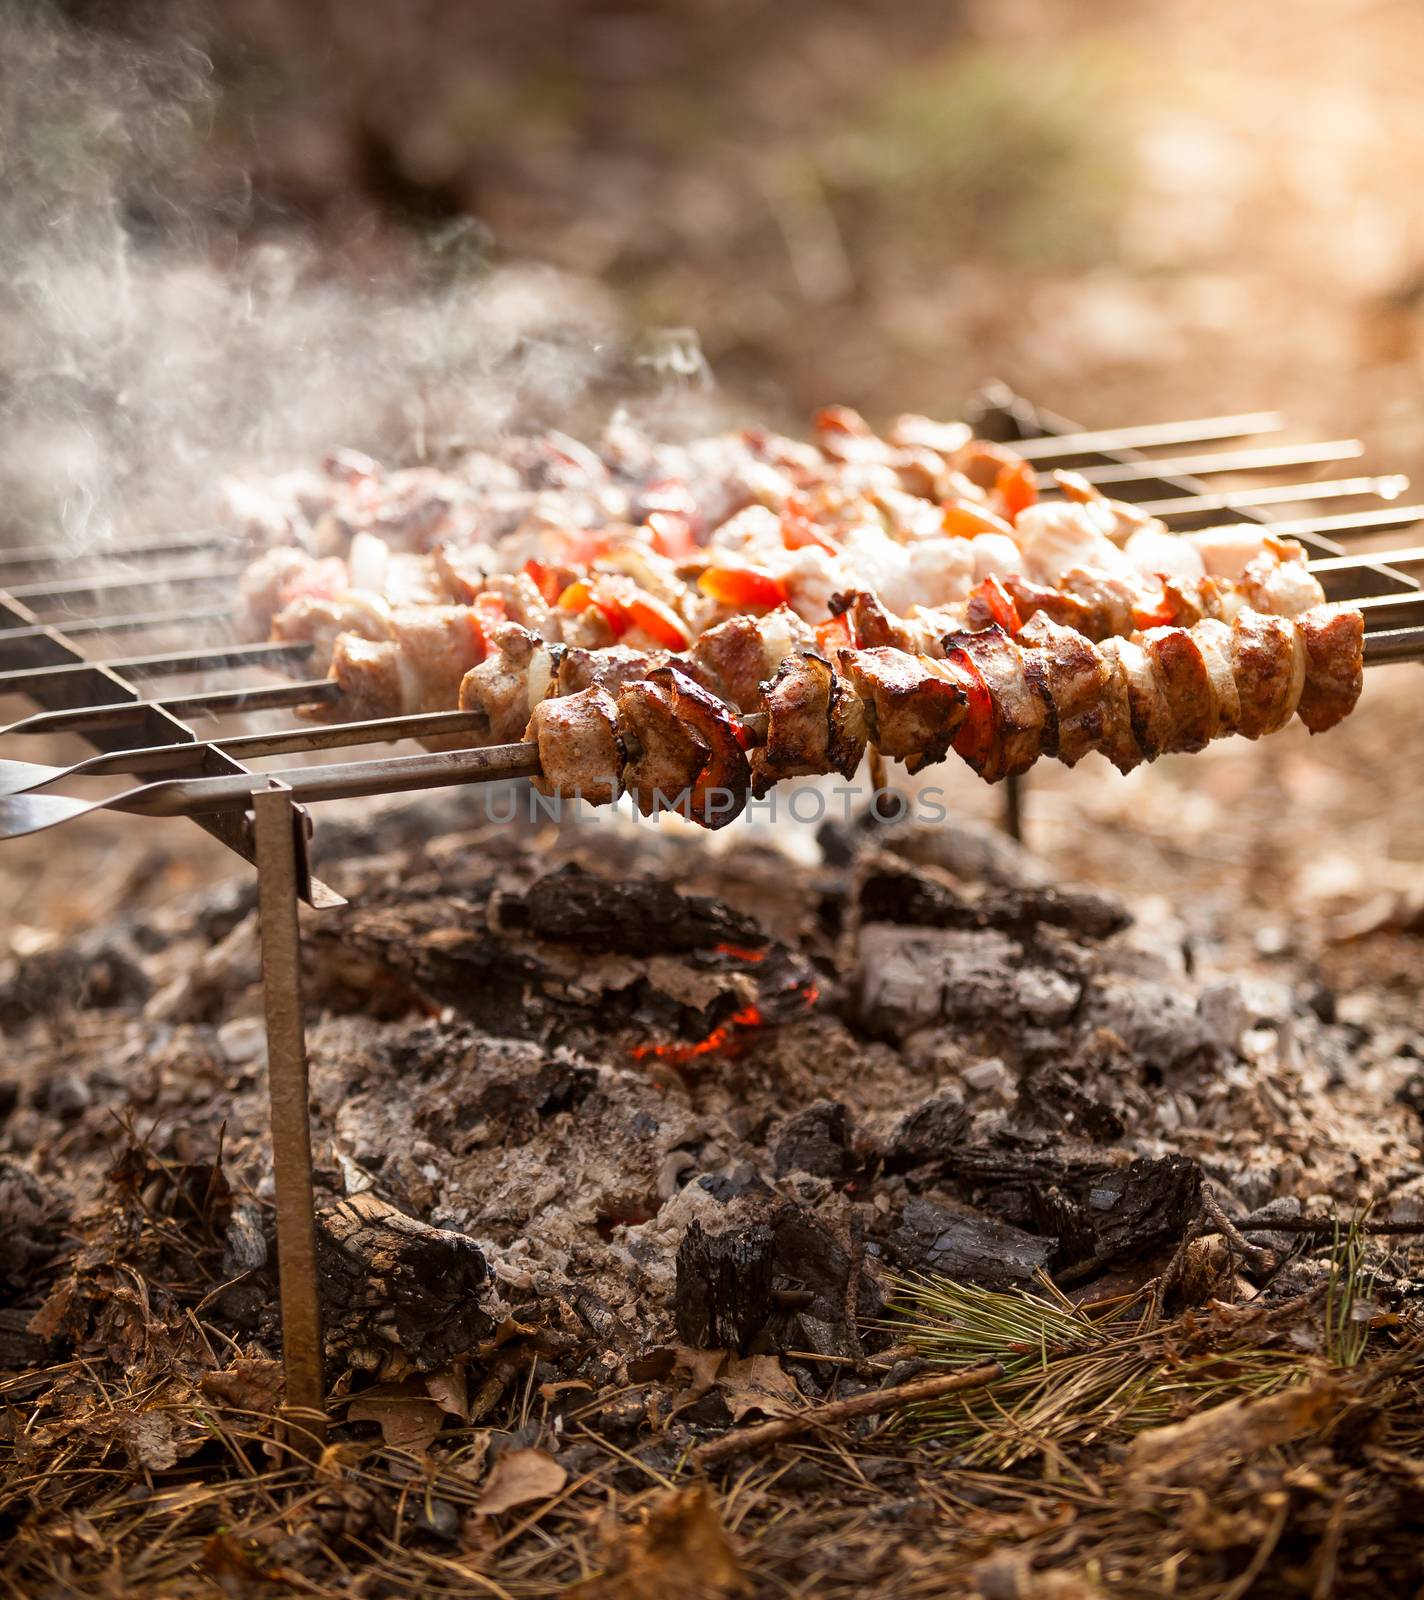 Closeup photo of kebab on fire at forest